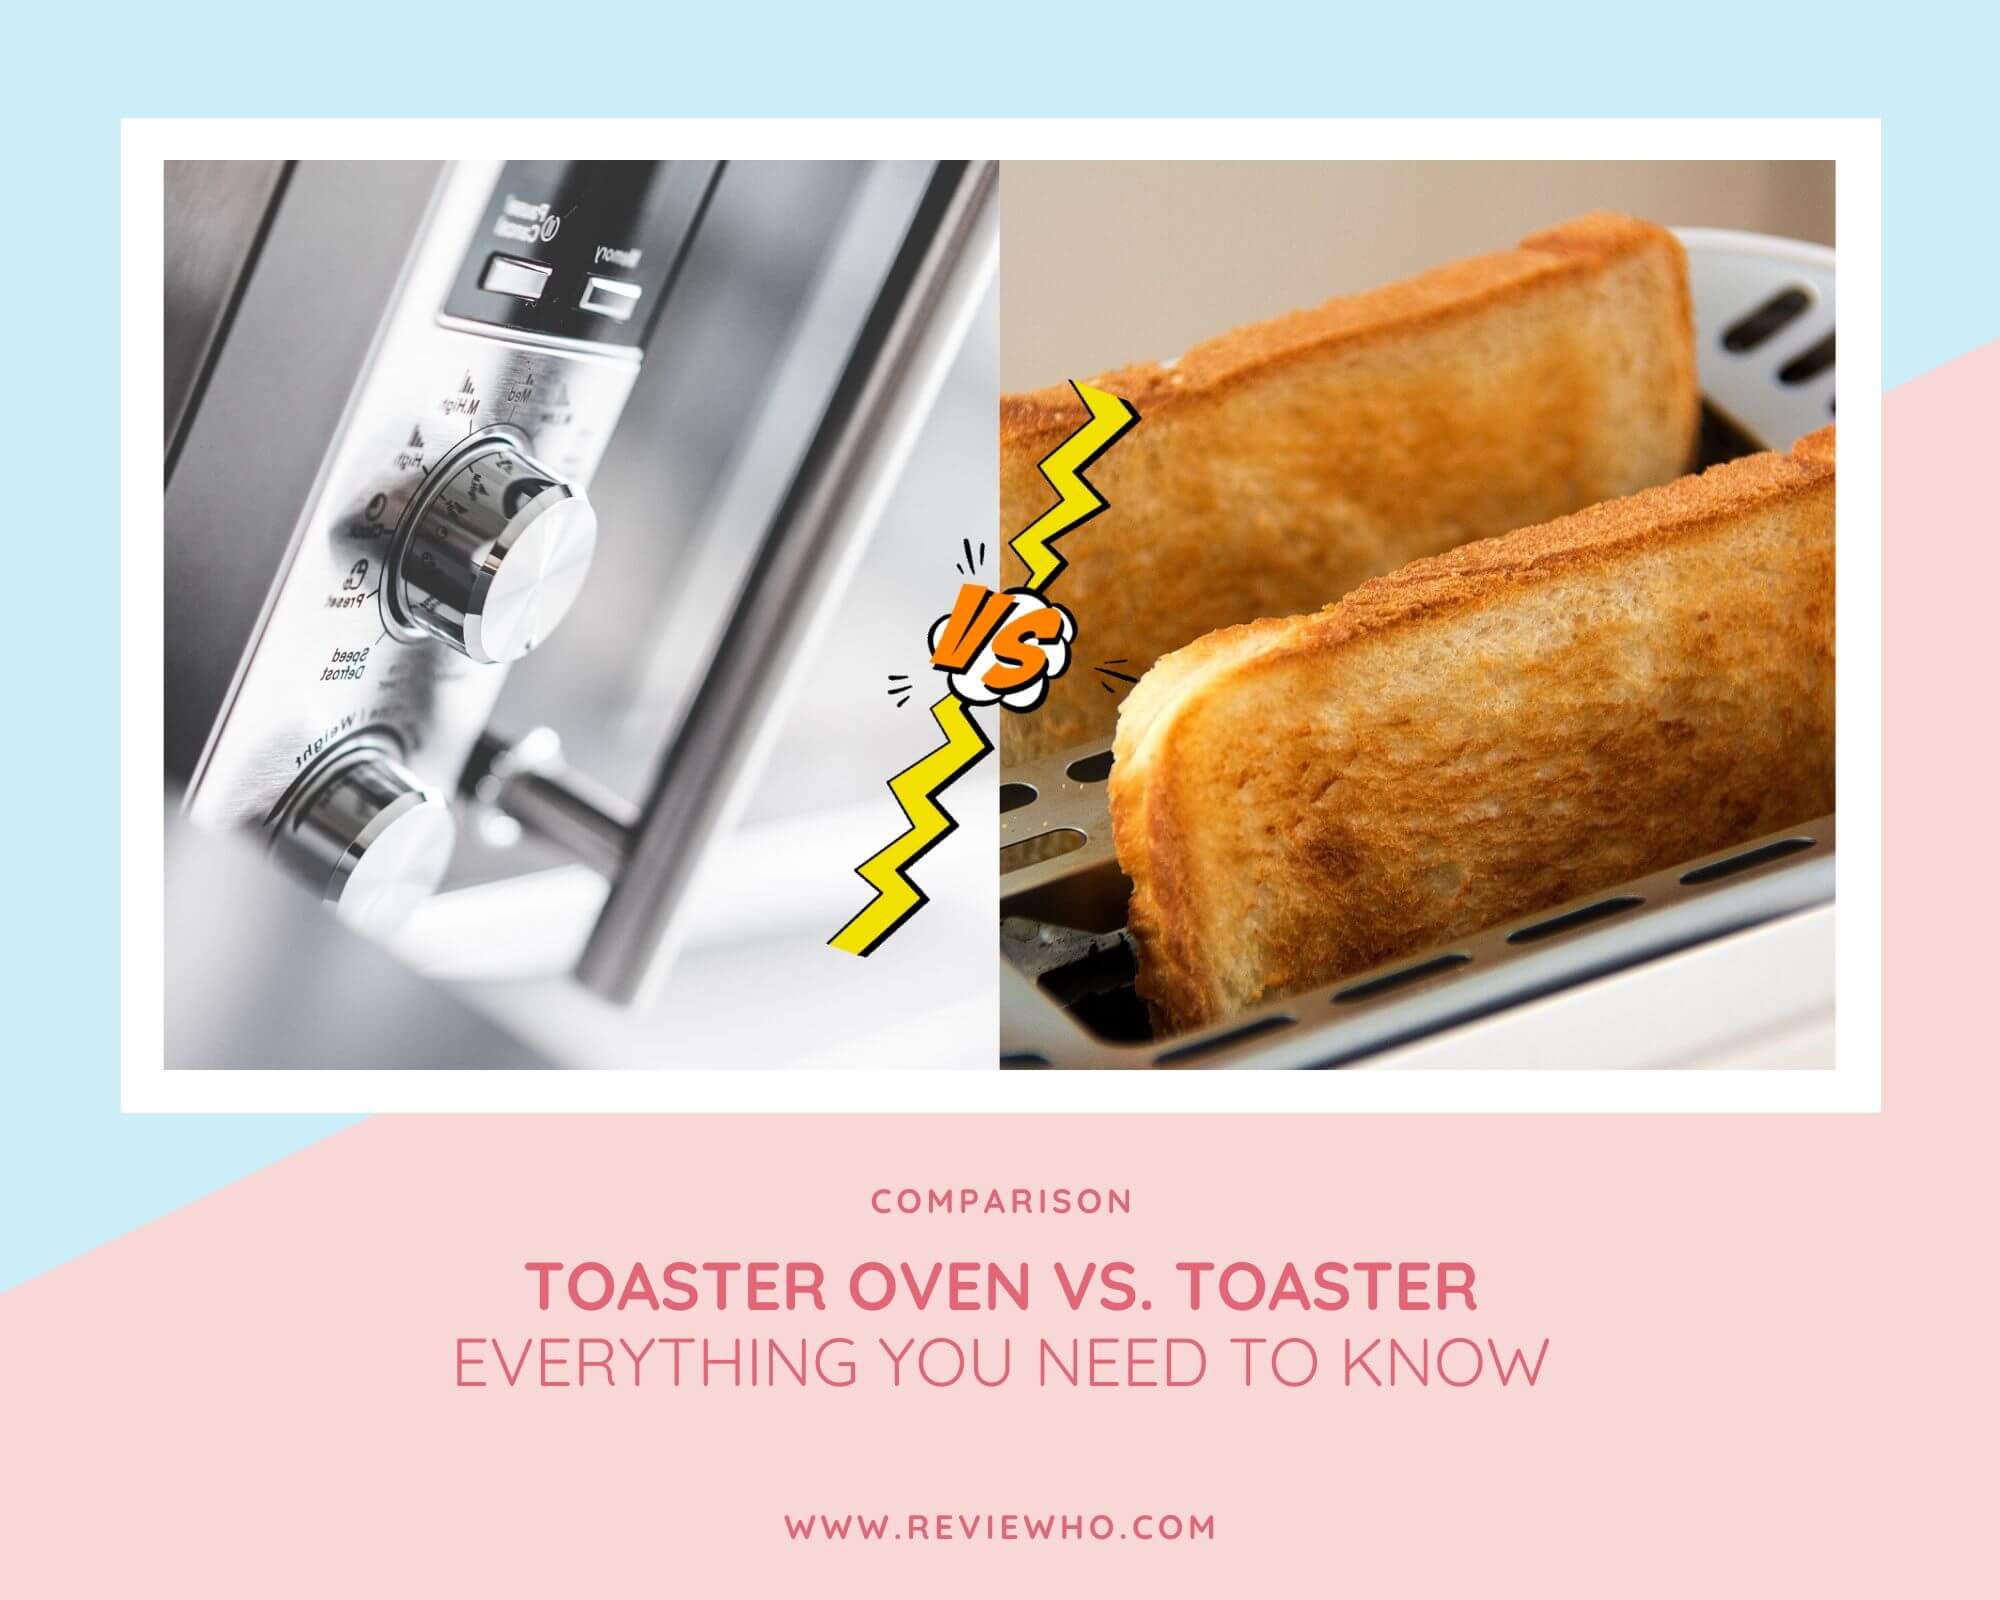 diffidence between toaster and toaster oven